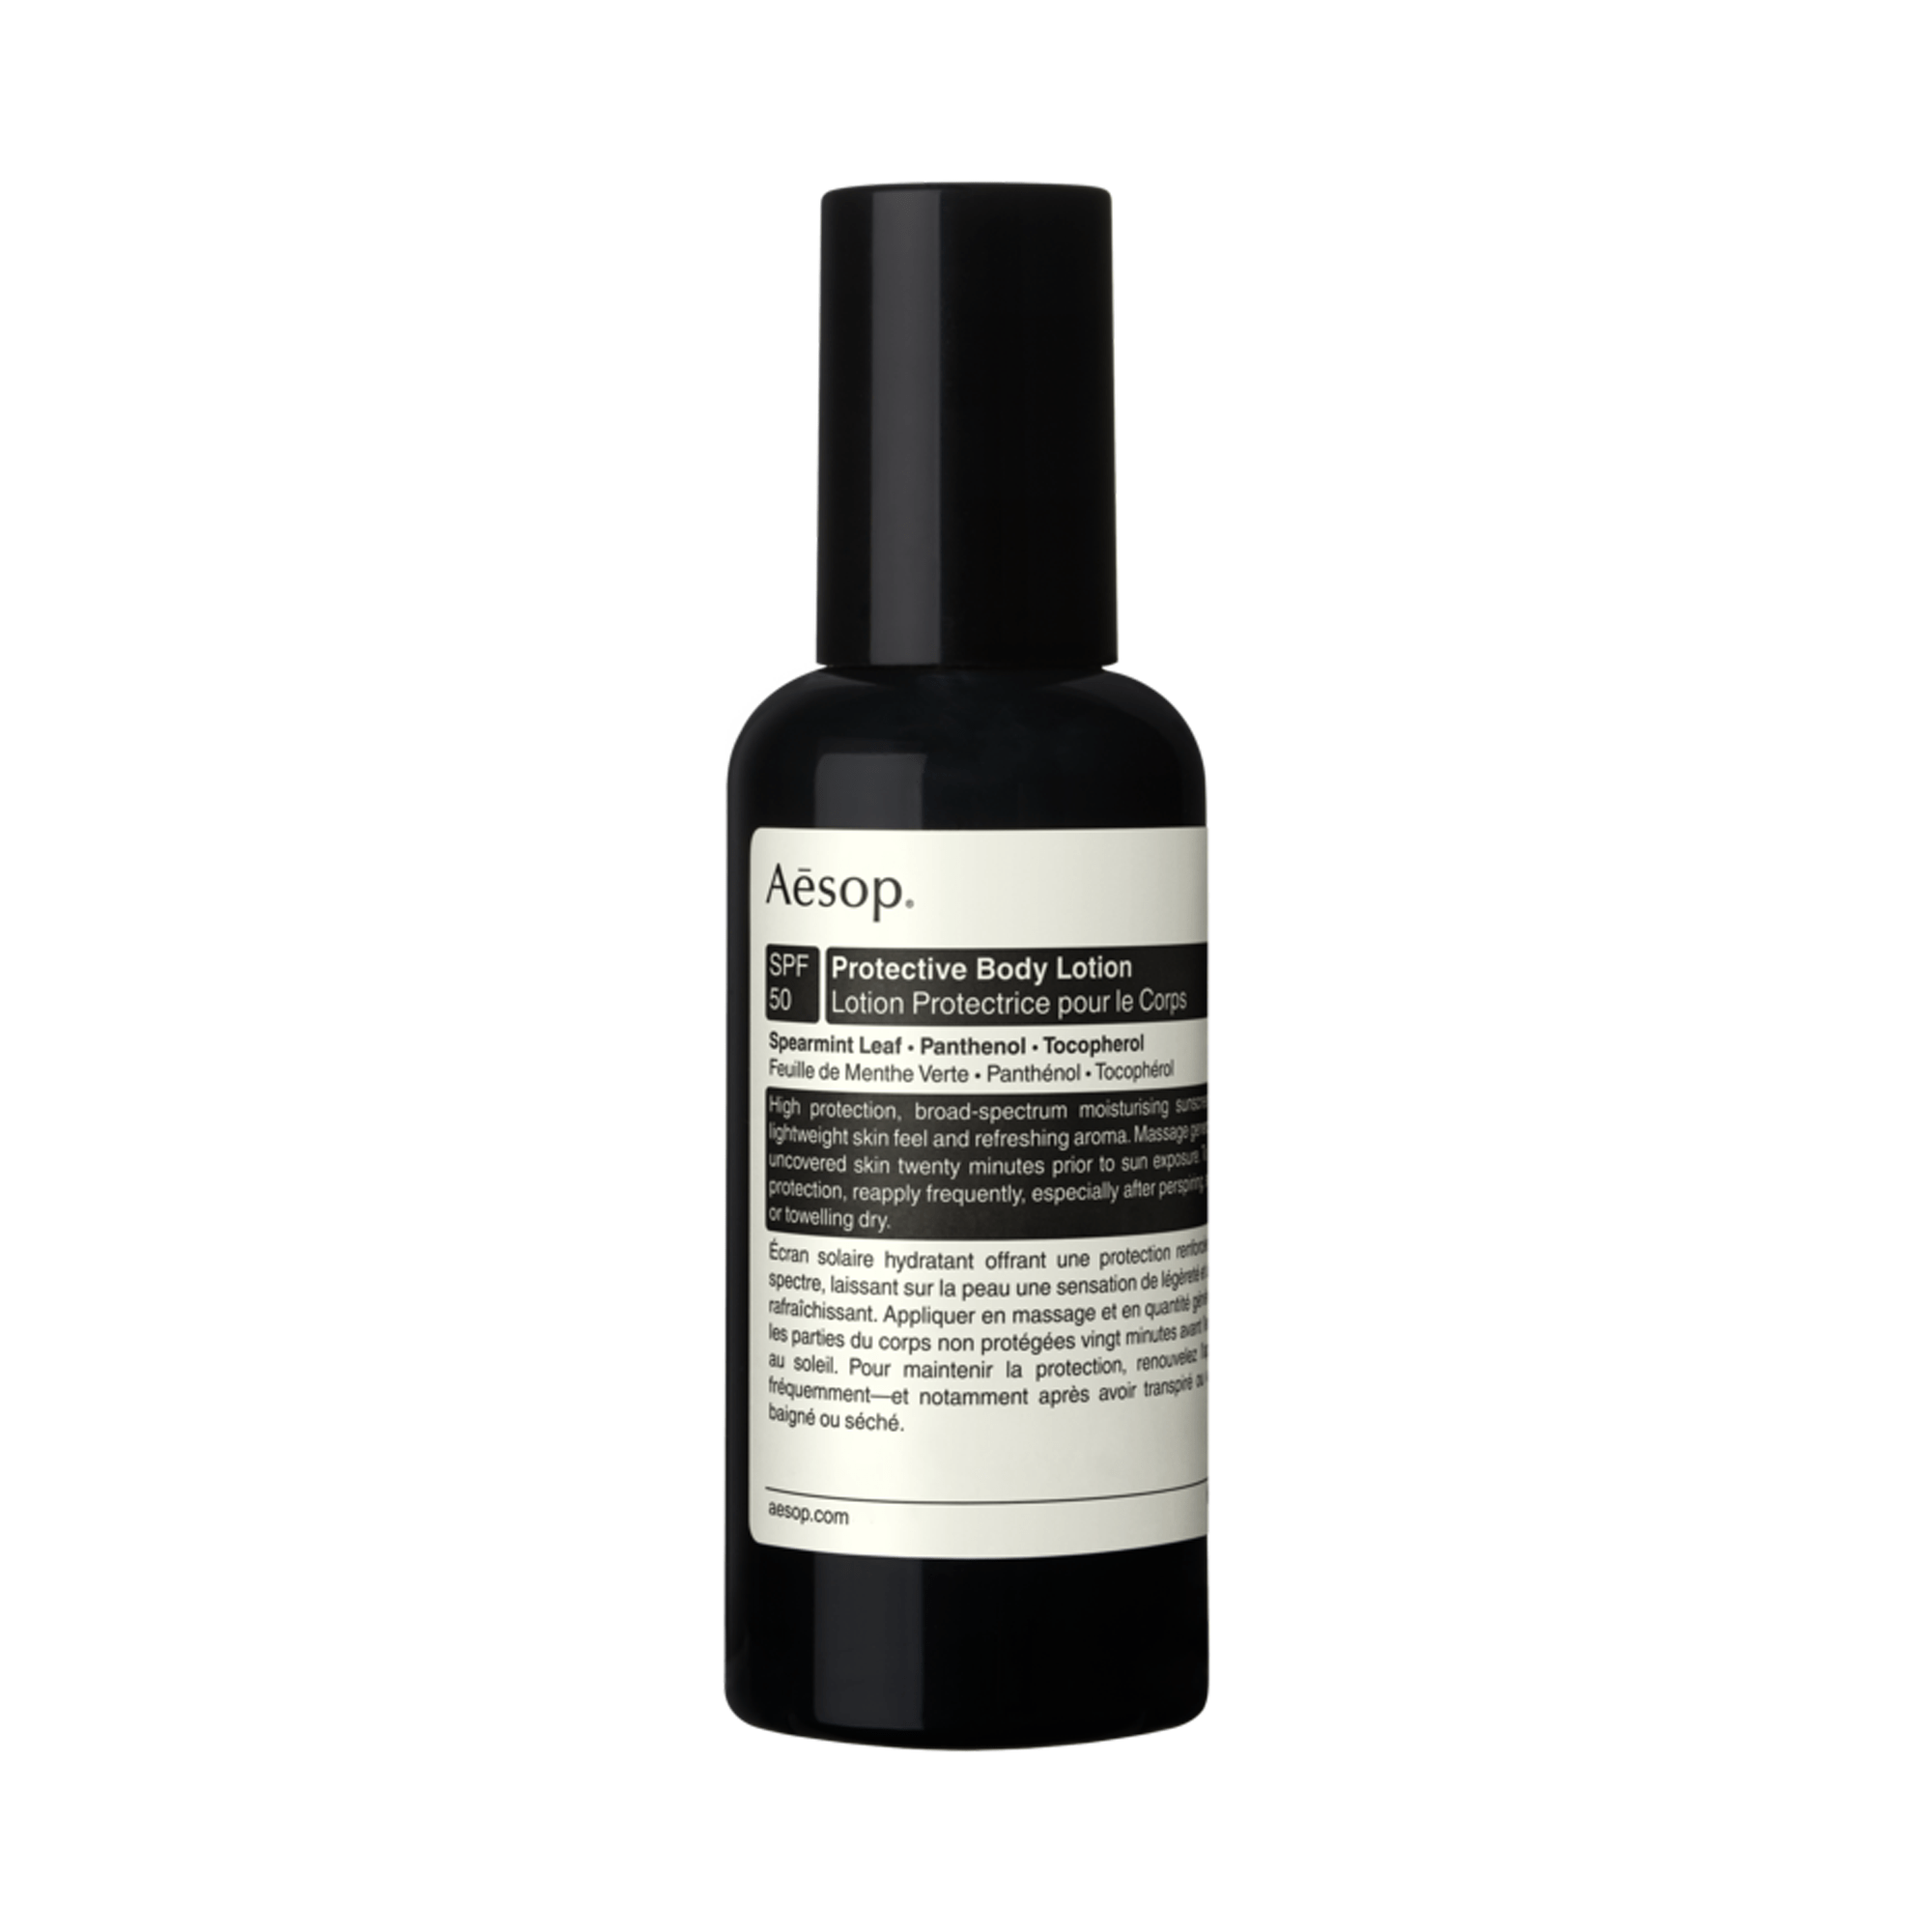 Protective Body Lotion SPF 50 Aesop Protective Body Sunscreen